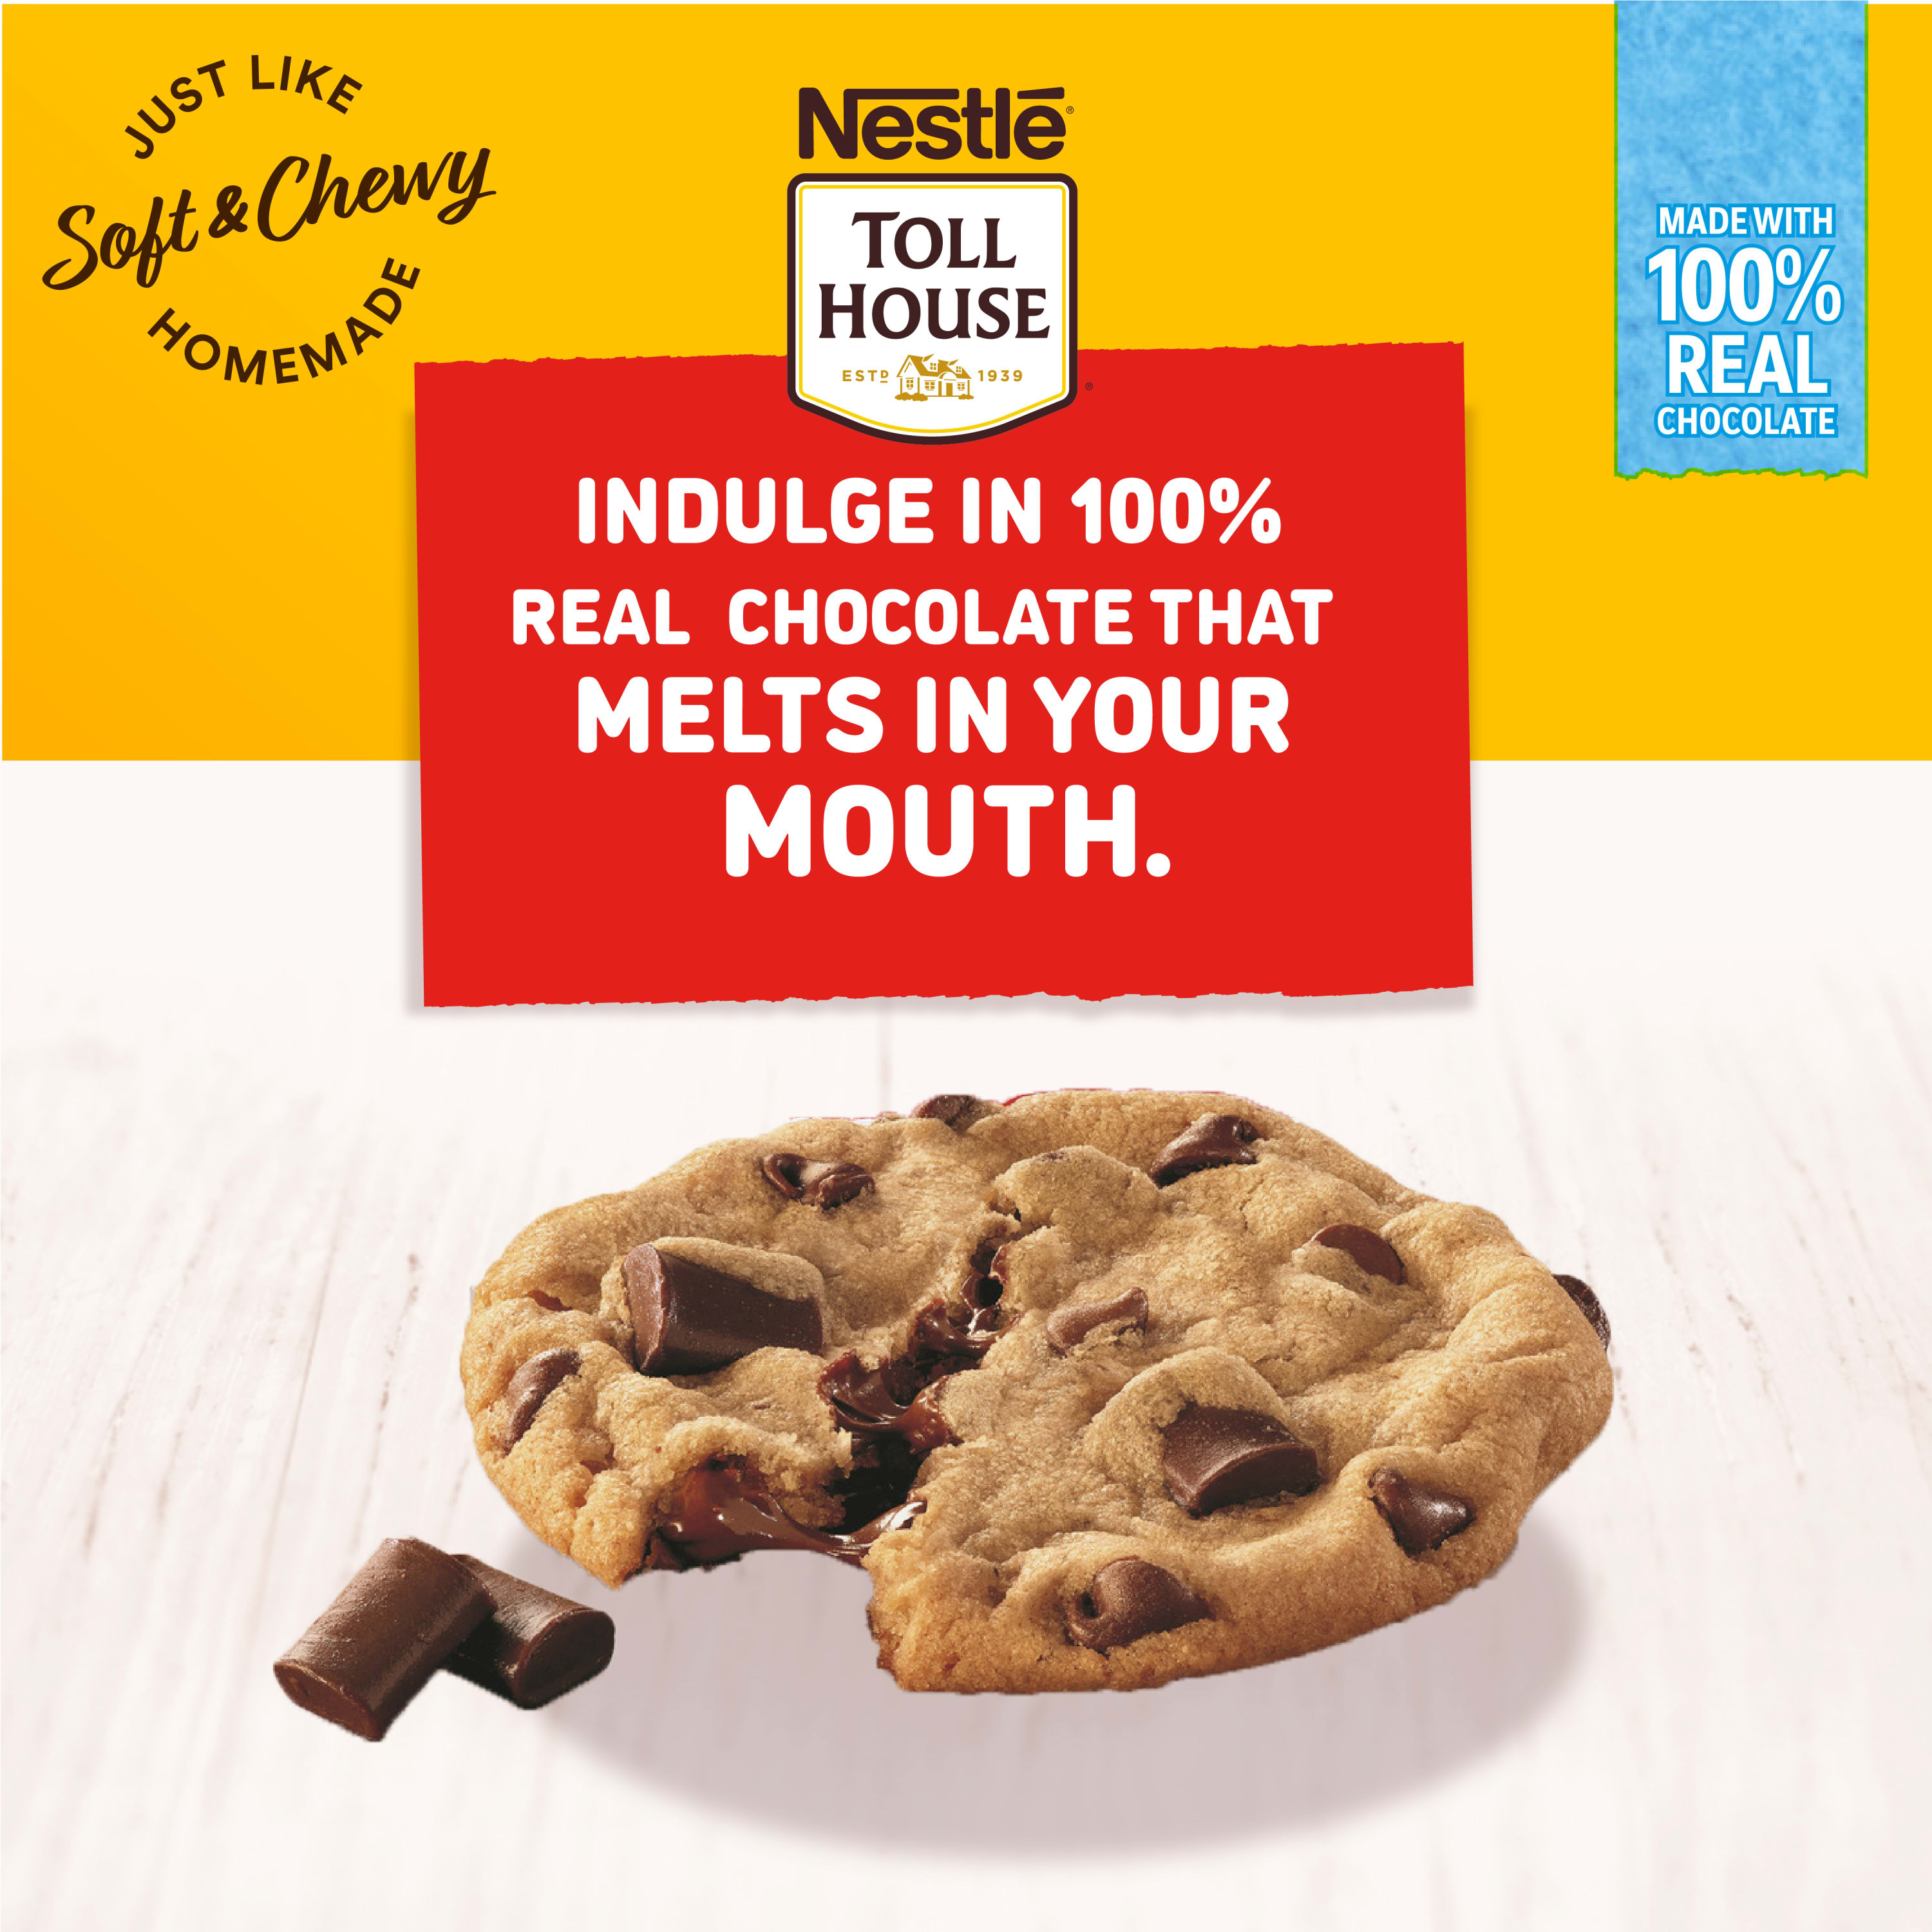 Nestle Toll House Chocolate Chip Lovers Cookie Dough, 16 oz, Makes 12 Giant Cookies - image 3 of 10